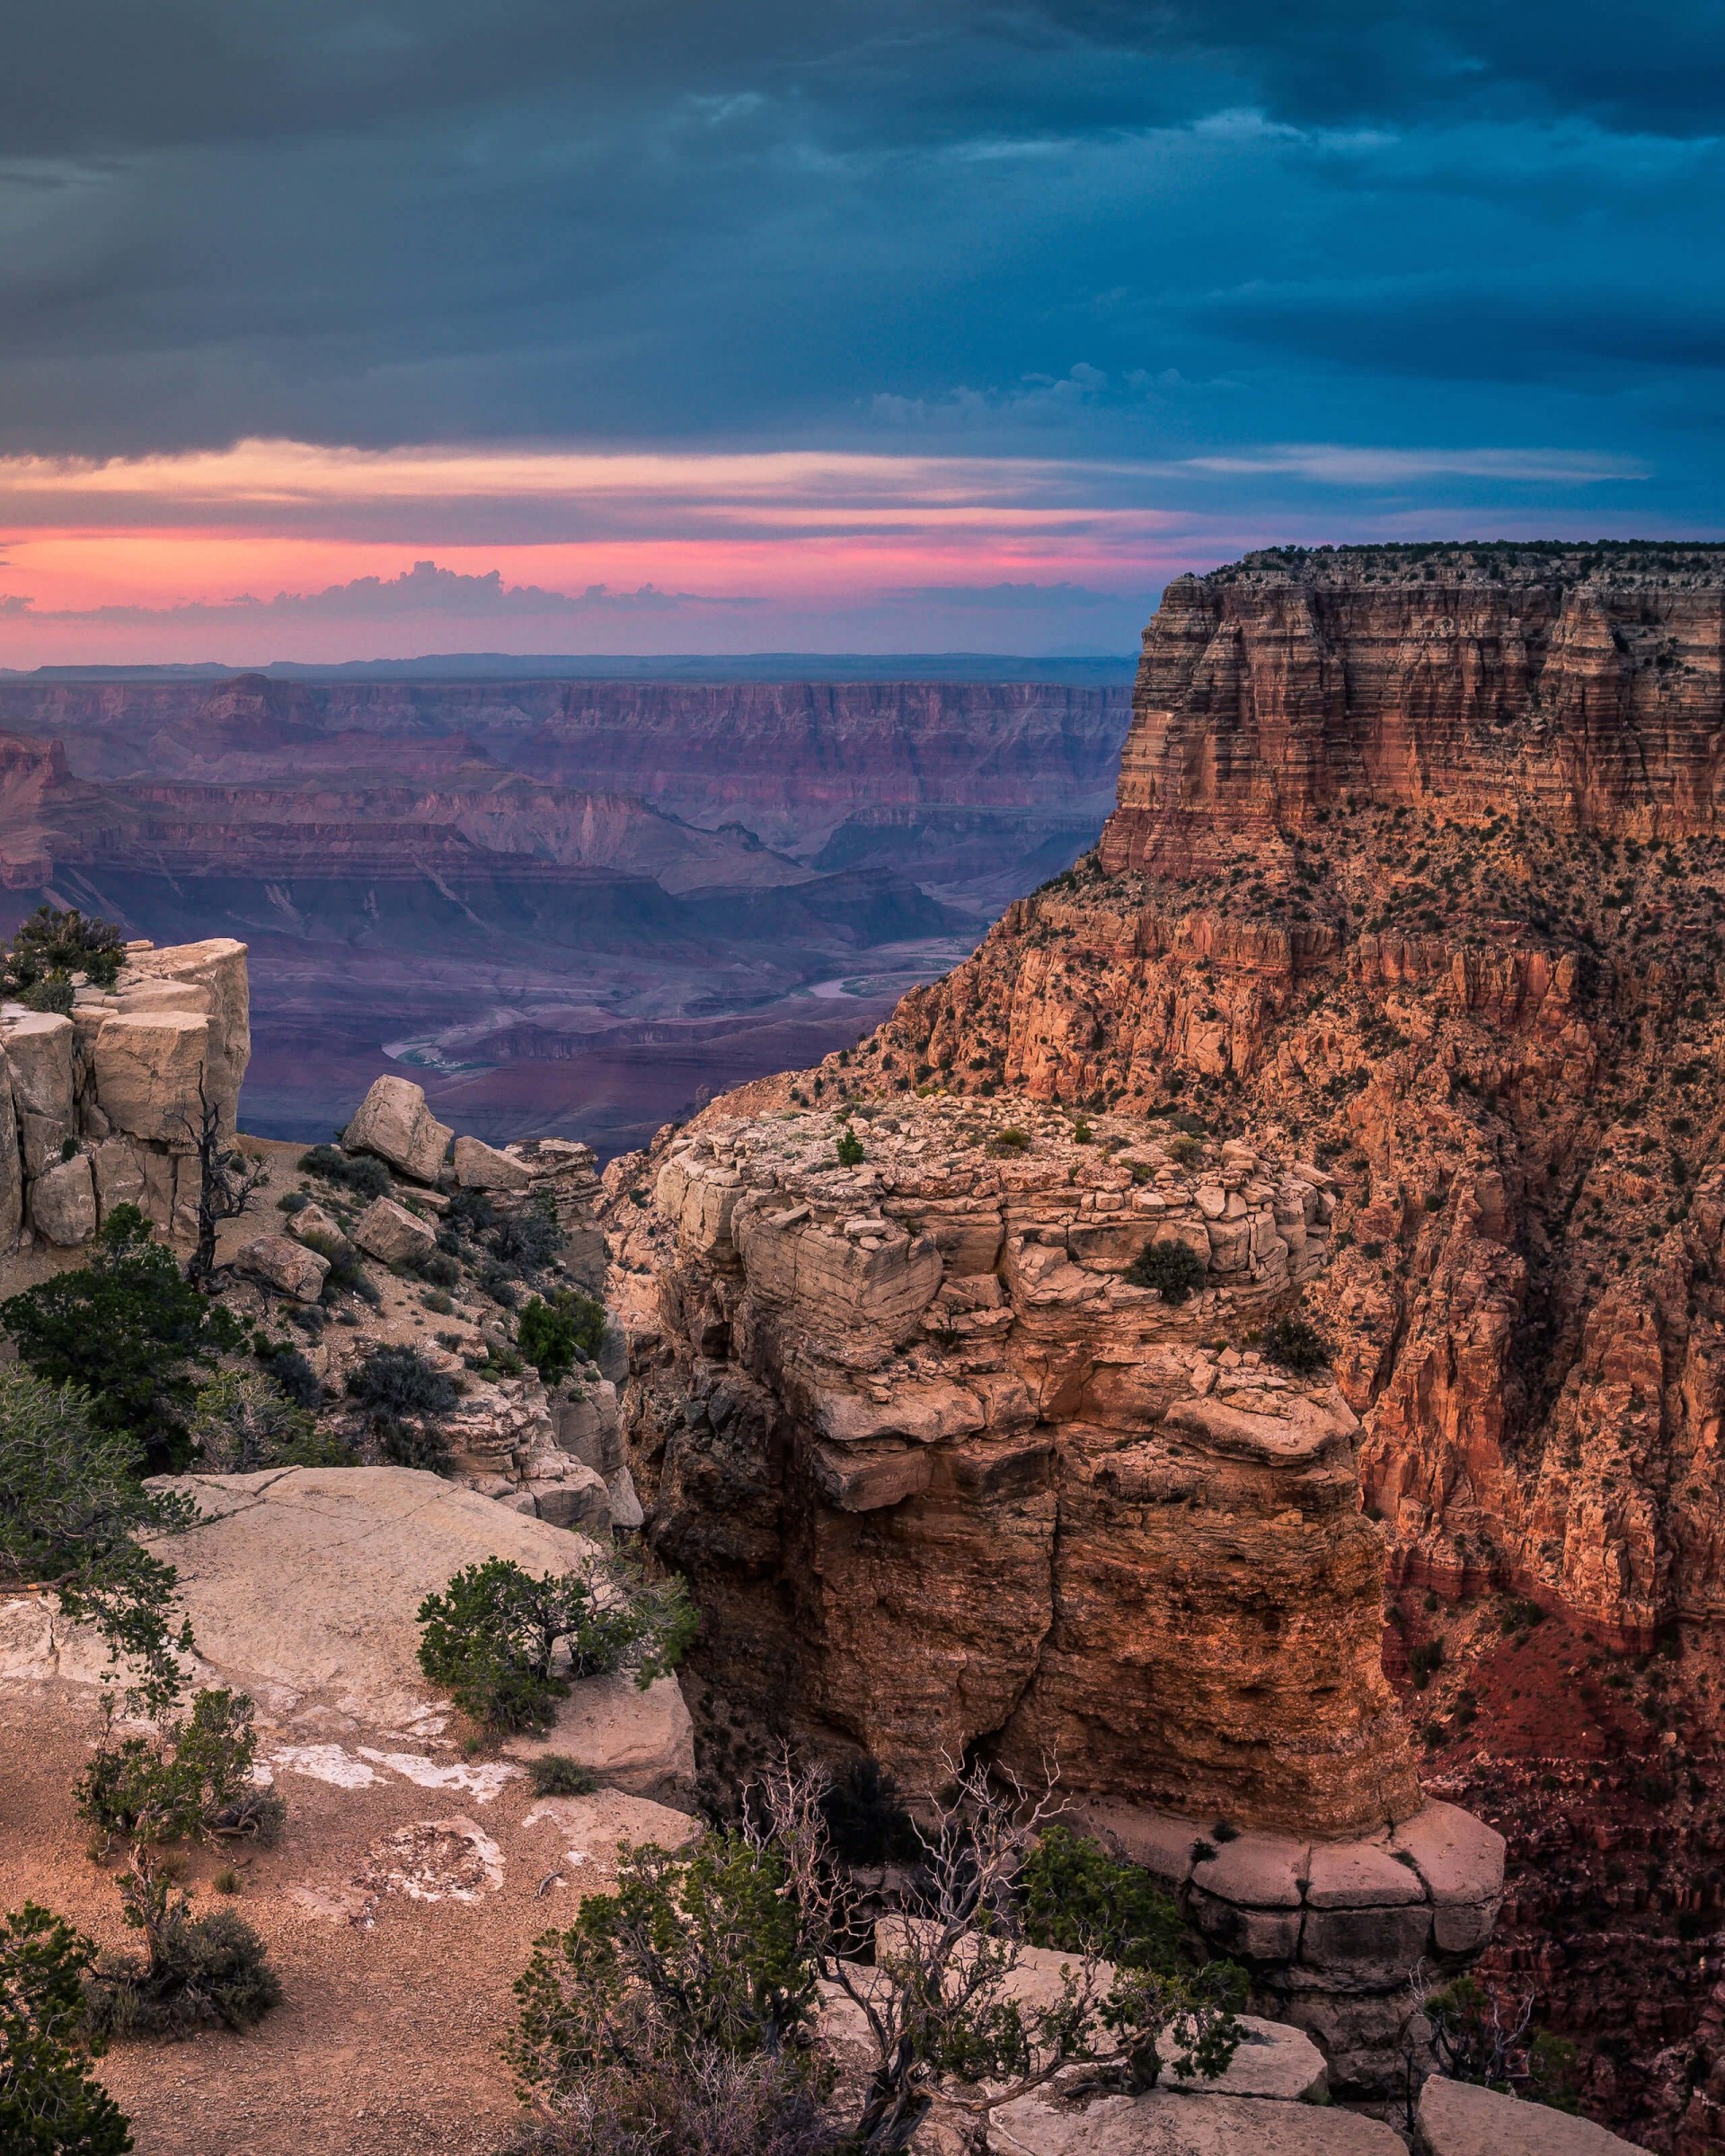 Sunset At The Grand Canyon Wallpaper for Google Nexus 7